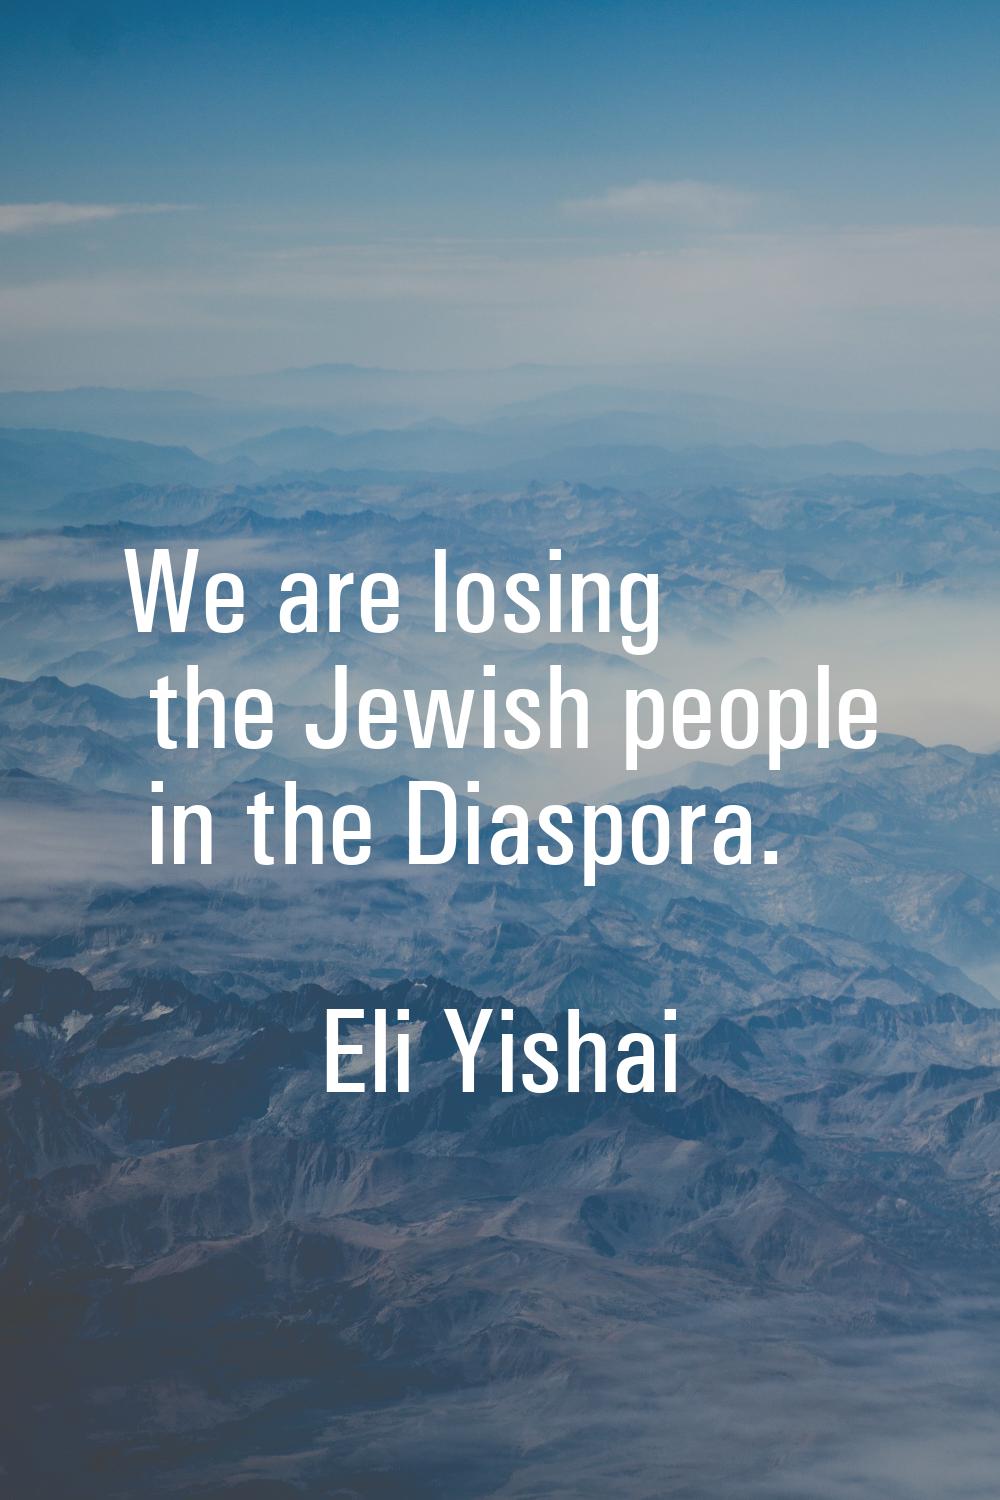 We are losing the Jewish people in the Diaspora.